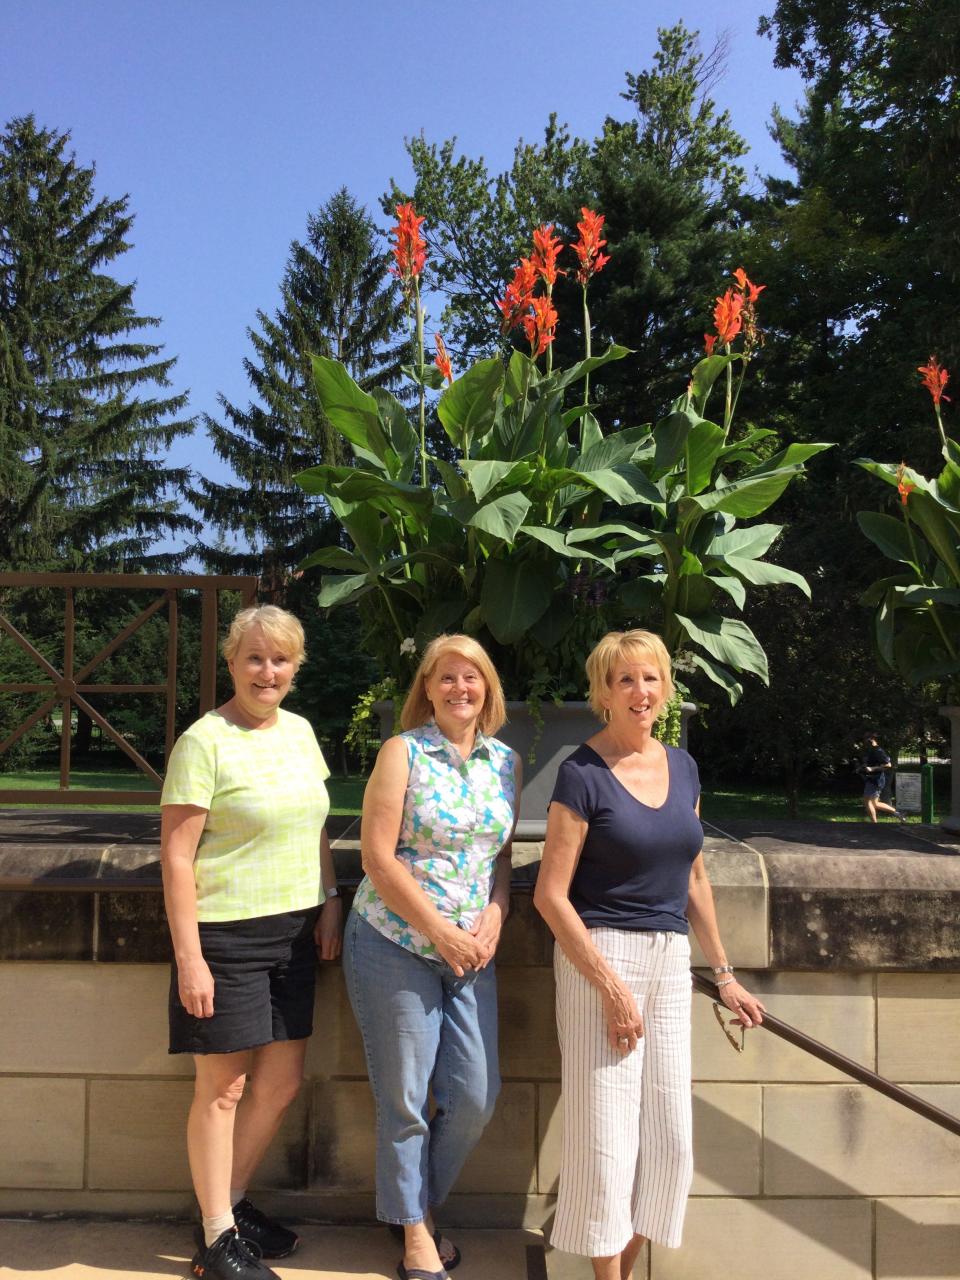 From left, Whispering Meadows Garden Club President Helen Duquette, of Fremont, and club members Betty Schade, of Bettsville, and Peggy Bliss, of Fremont, are part of the club’s team that donates time, talents and plants to make the flower boxes at the Rutherford B. Hayes Presidential Library and Museums look beautiful throughout the year. Club members also involved in the project but not pictured are Mary Gochenour, of Oak Harbor, and Carolyn Johnson, of Fremont.